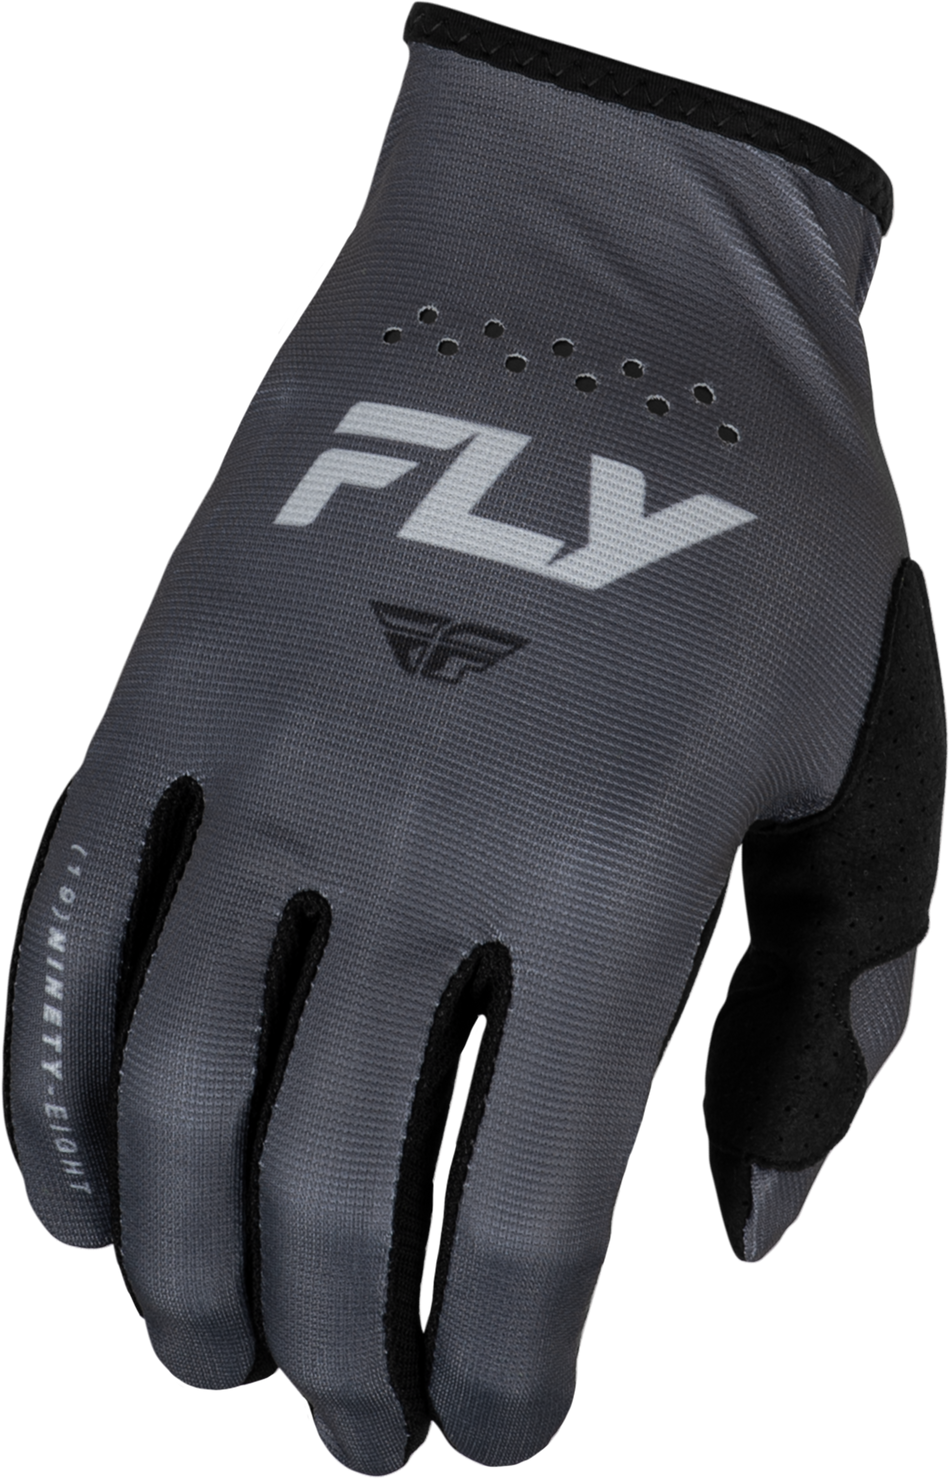 FLY RACING Lite Gloves Charcoal/Black Md 377-711M